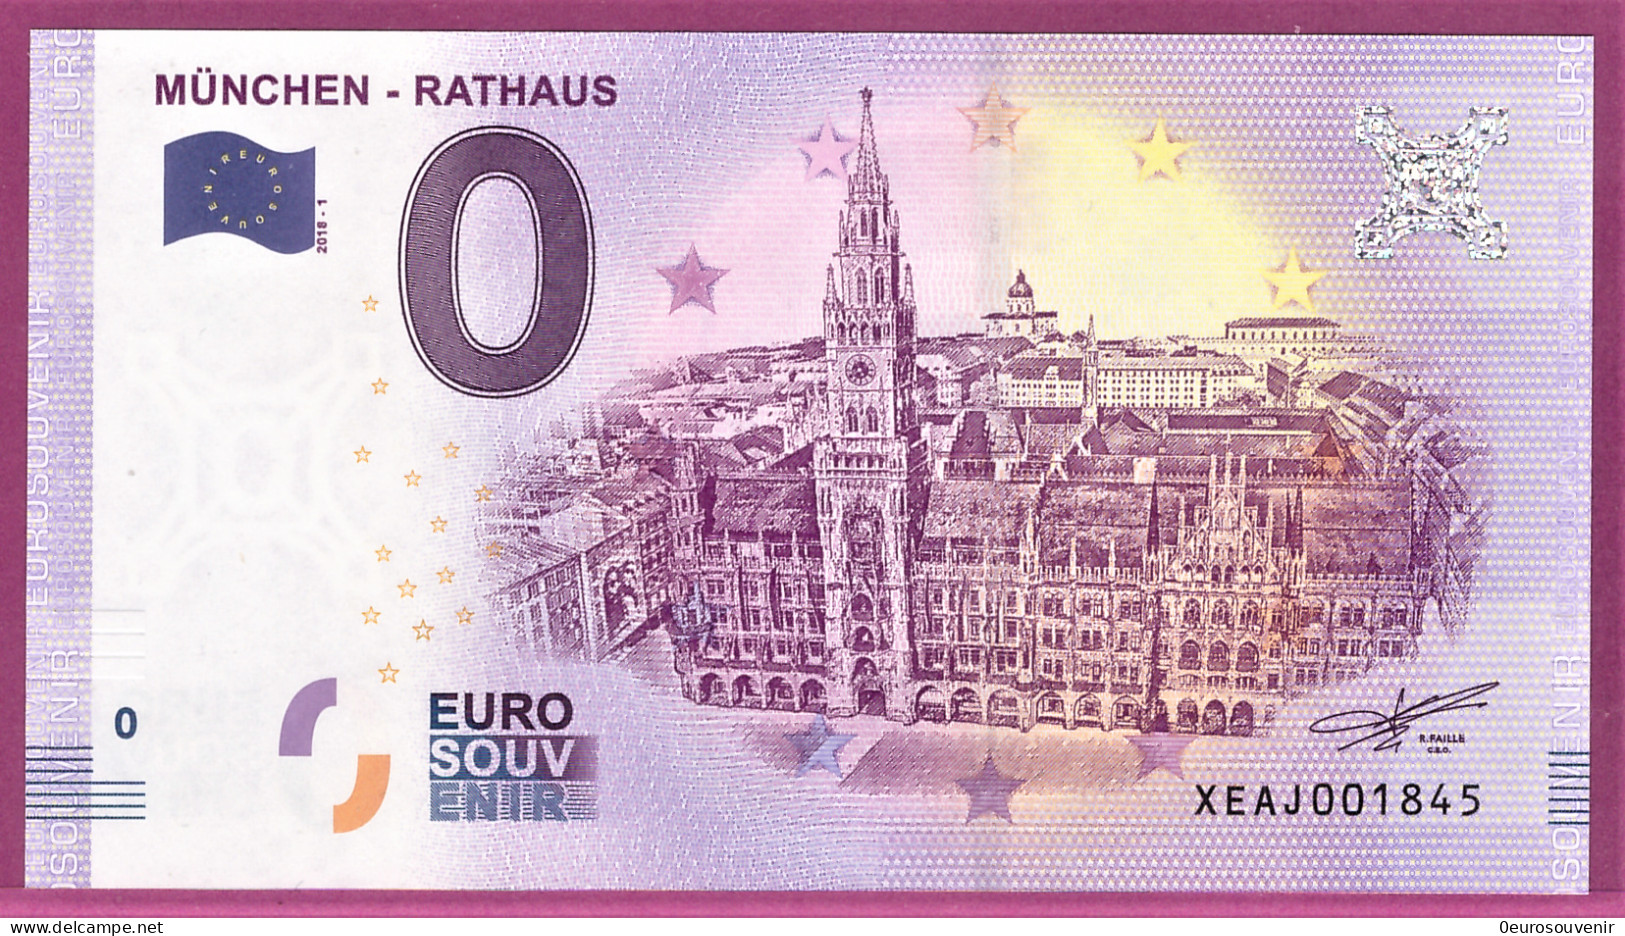 0-Euro XEAJ 2018-1 MÜNCHEN - RATHAUS S-11 XOX - Private Proofs / Unofficial